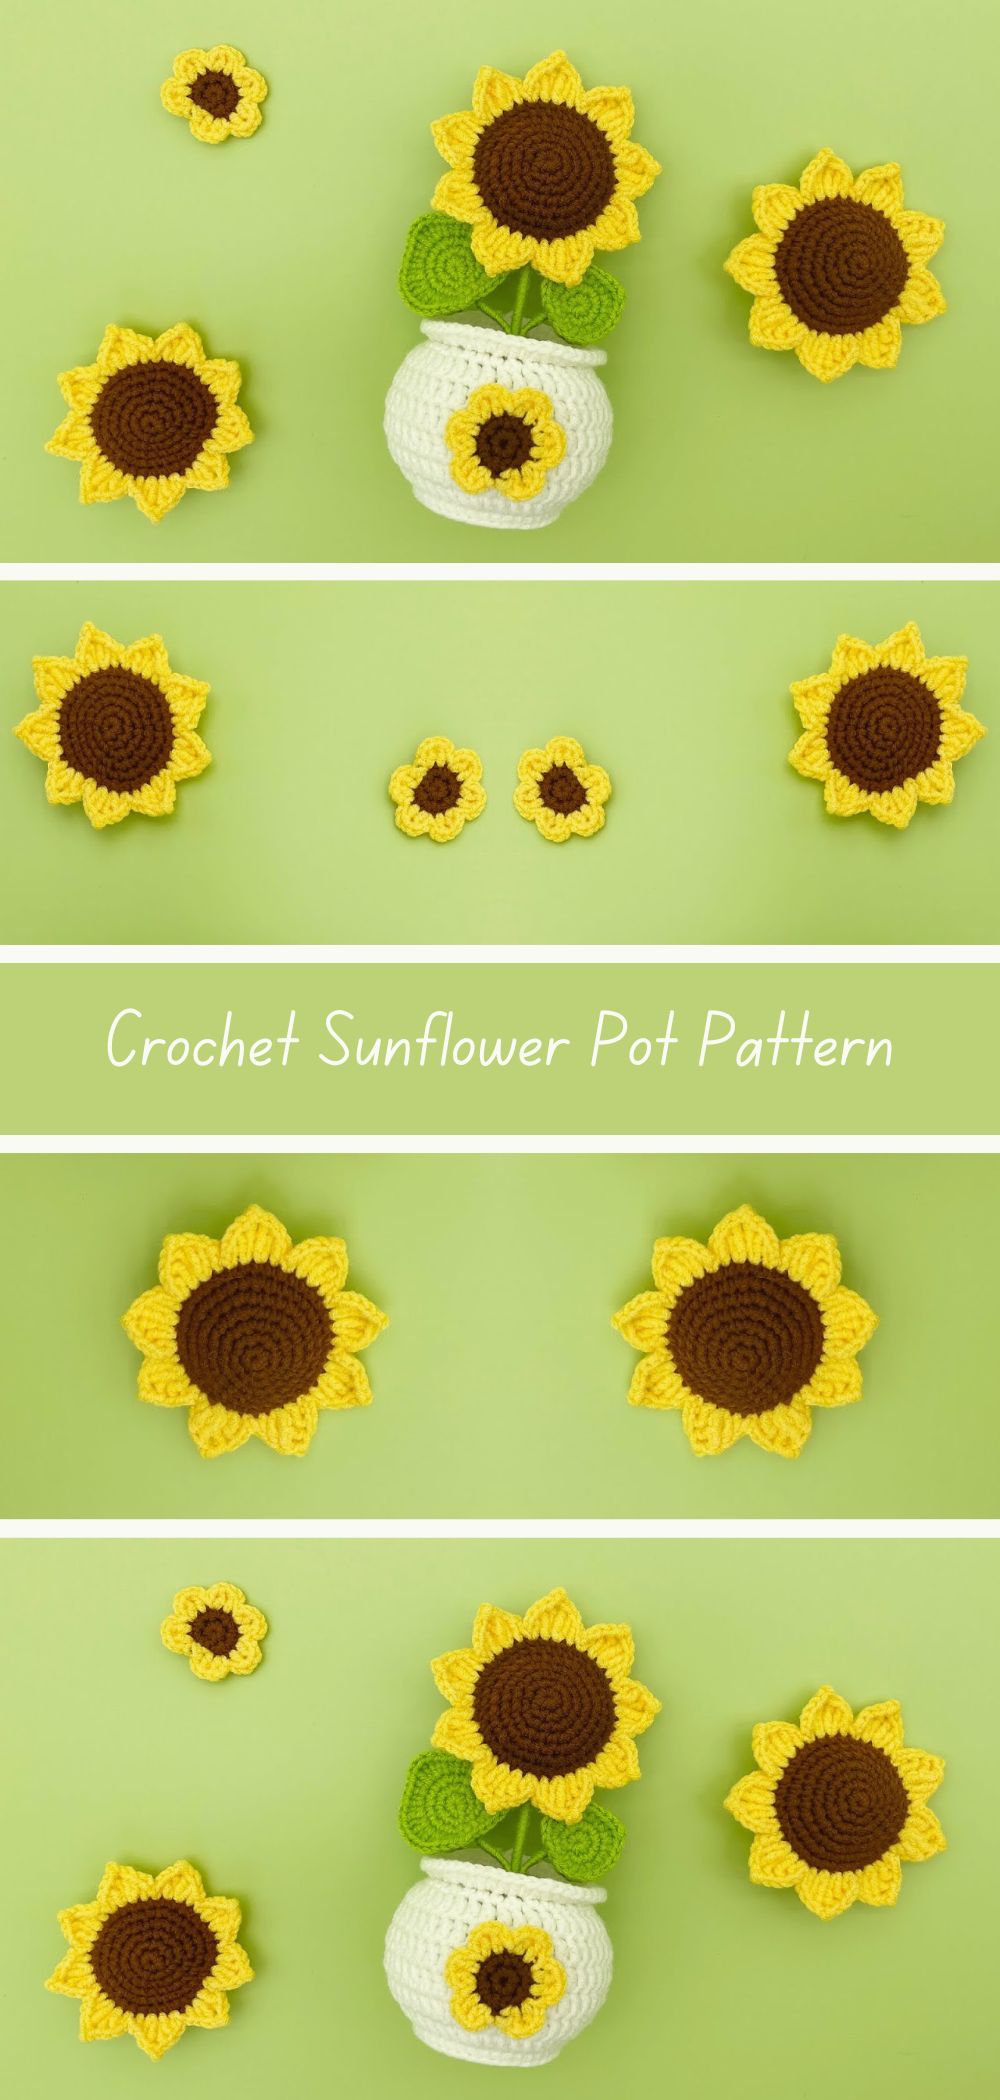 Crochet sunflower pot pattern tutorial with guided instructions.